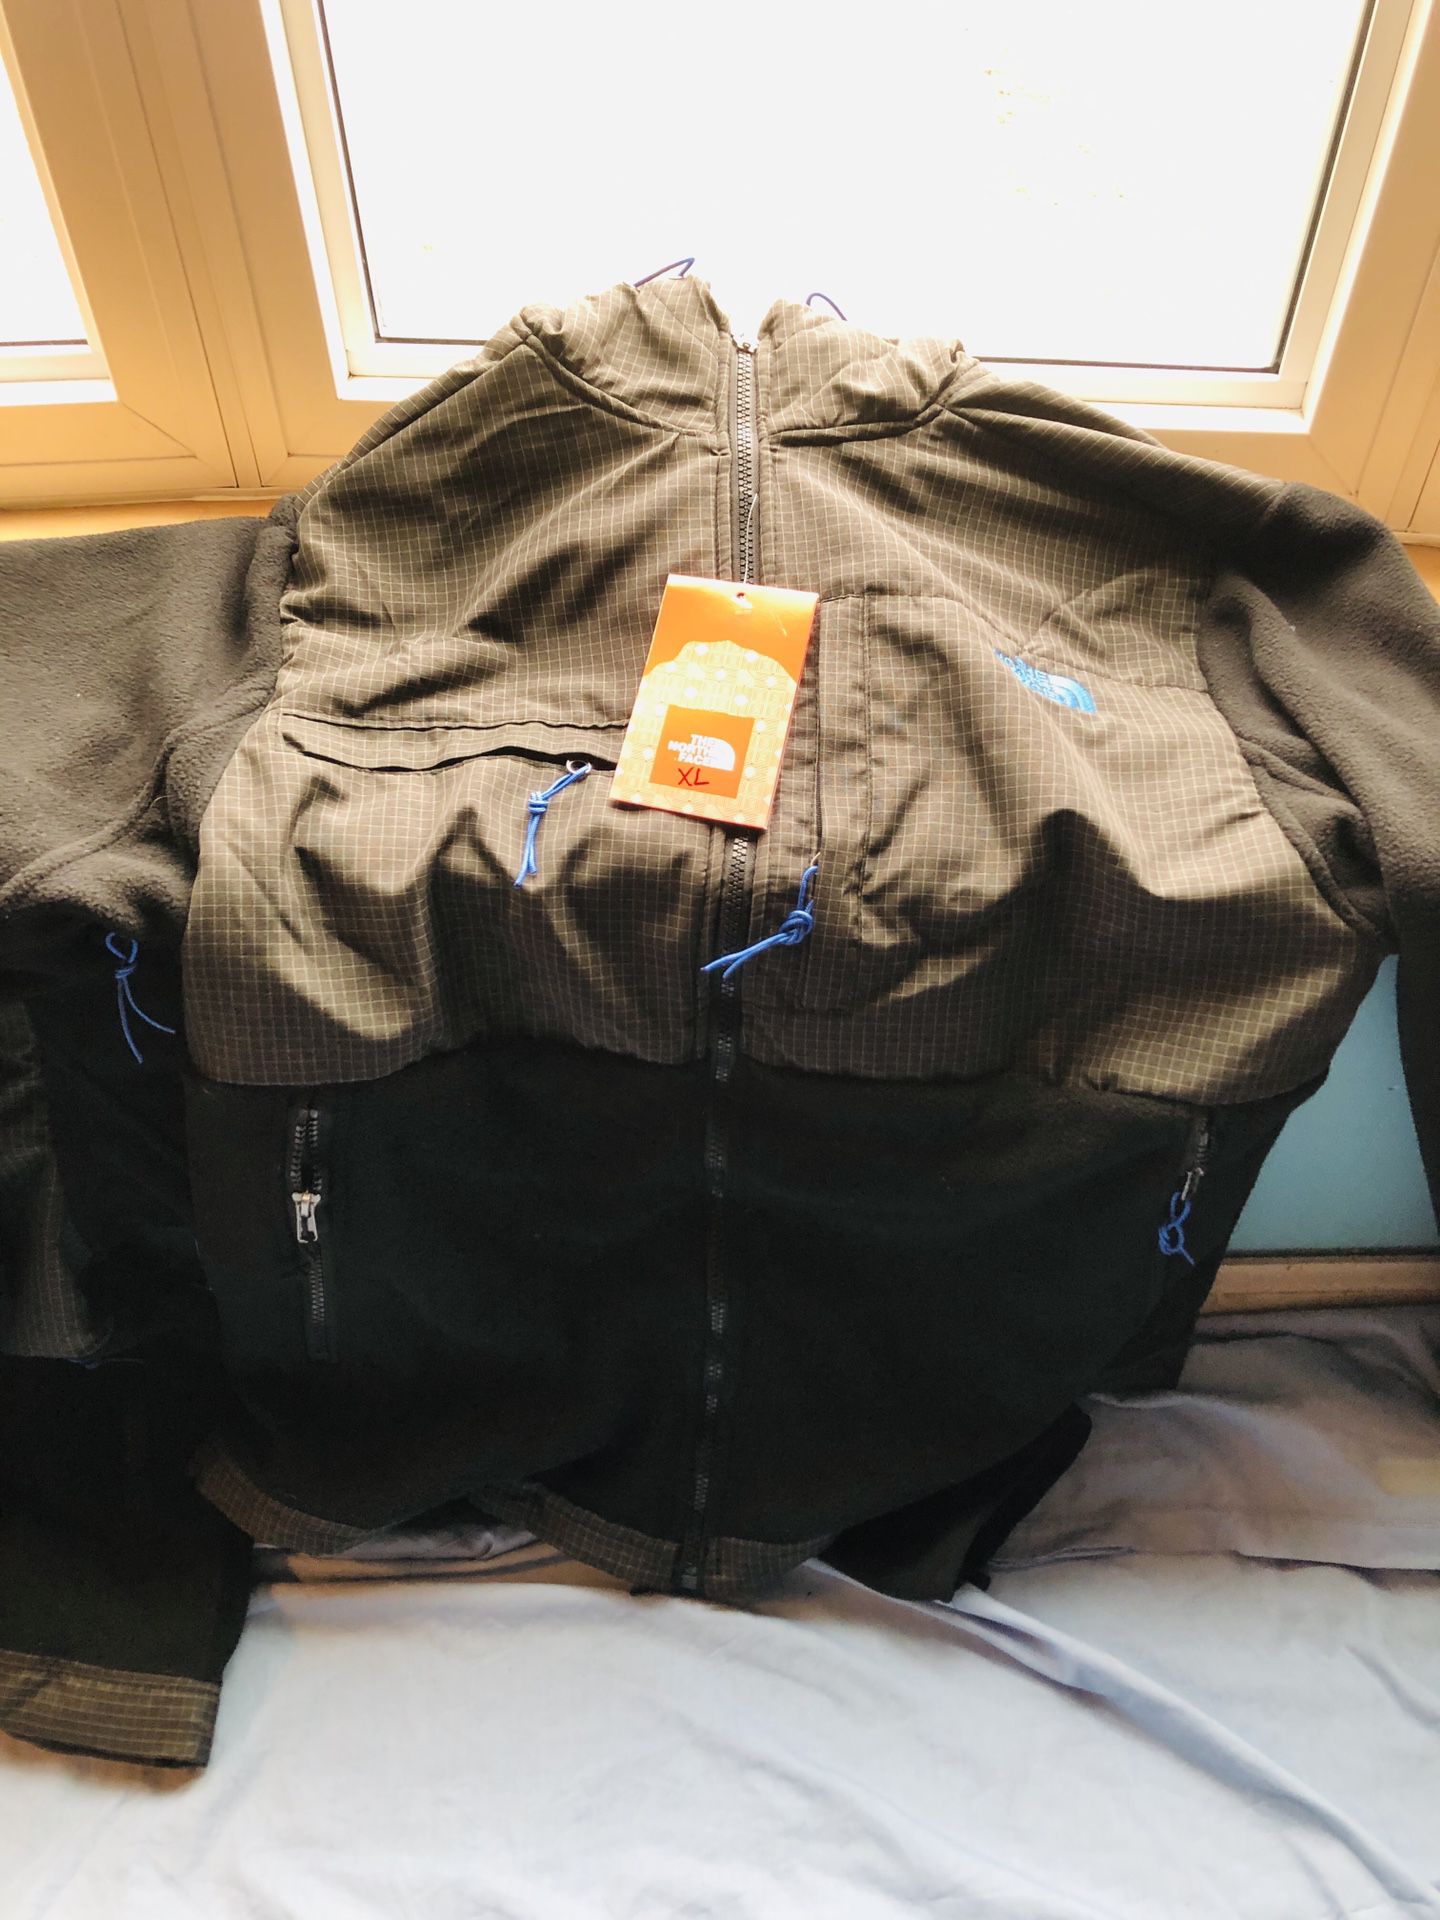 North face fleece jacket with hoodie